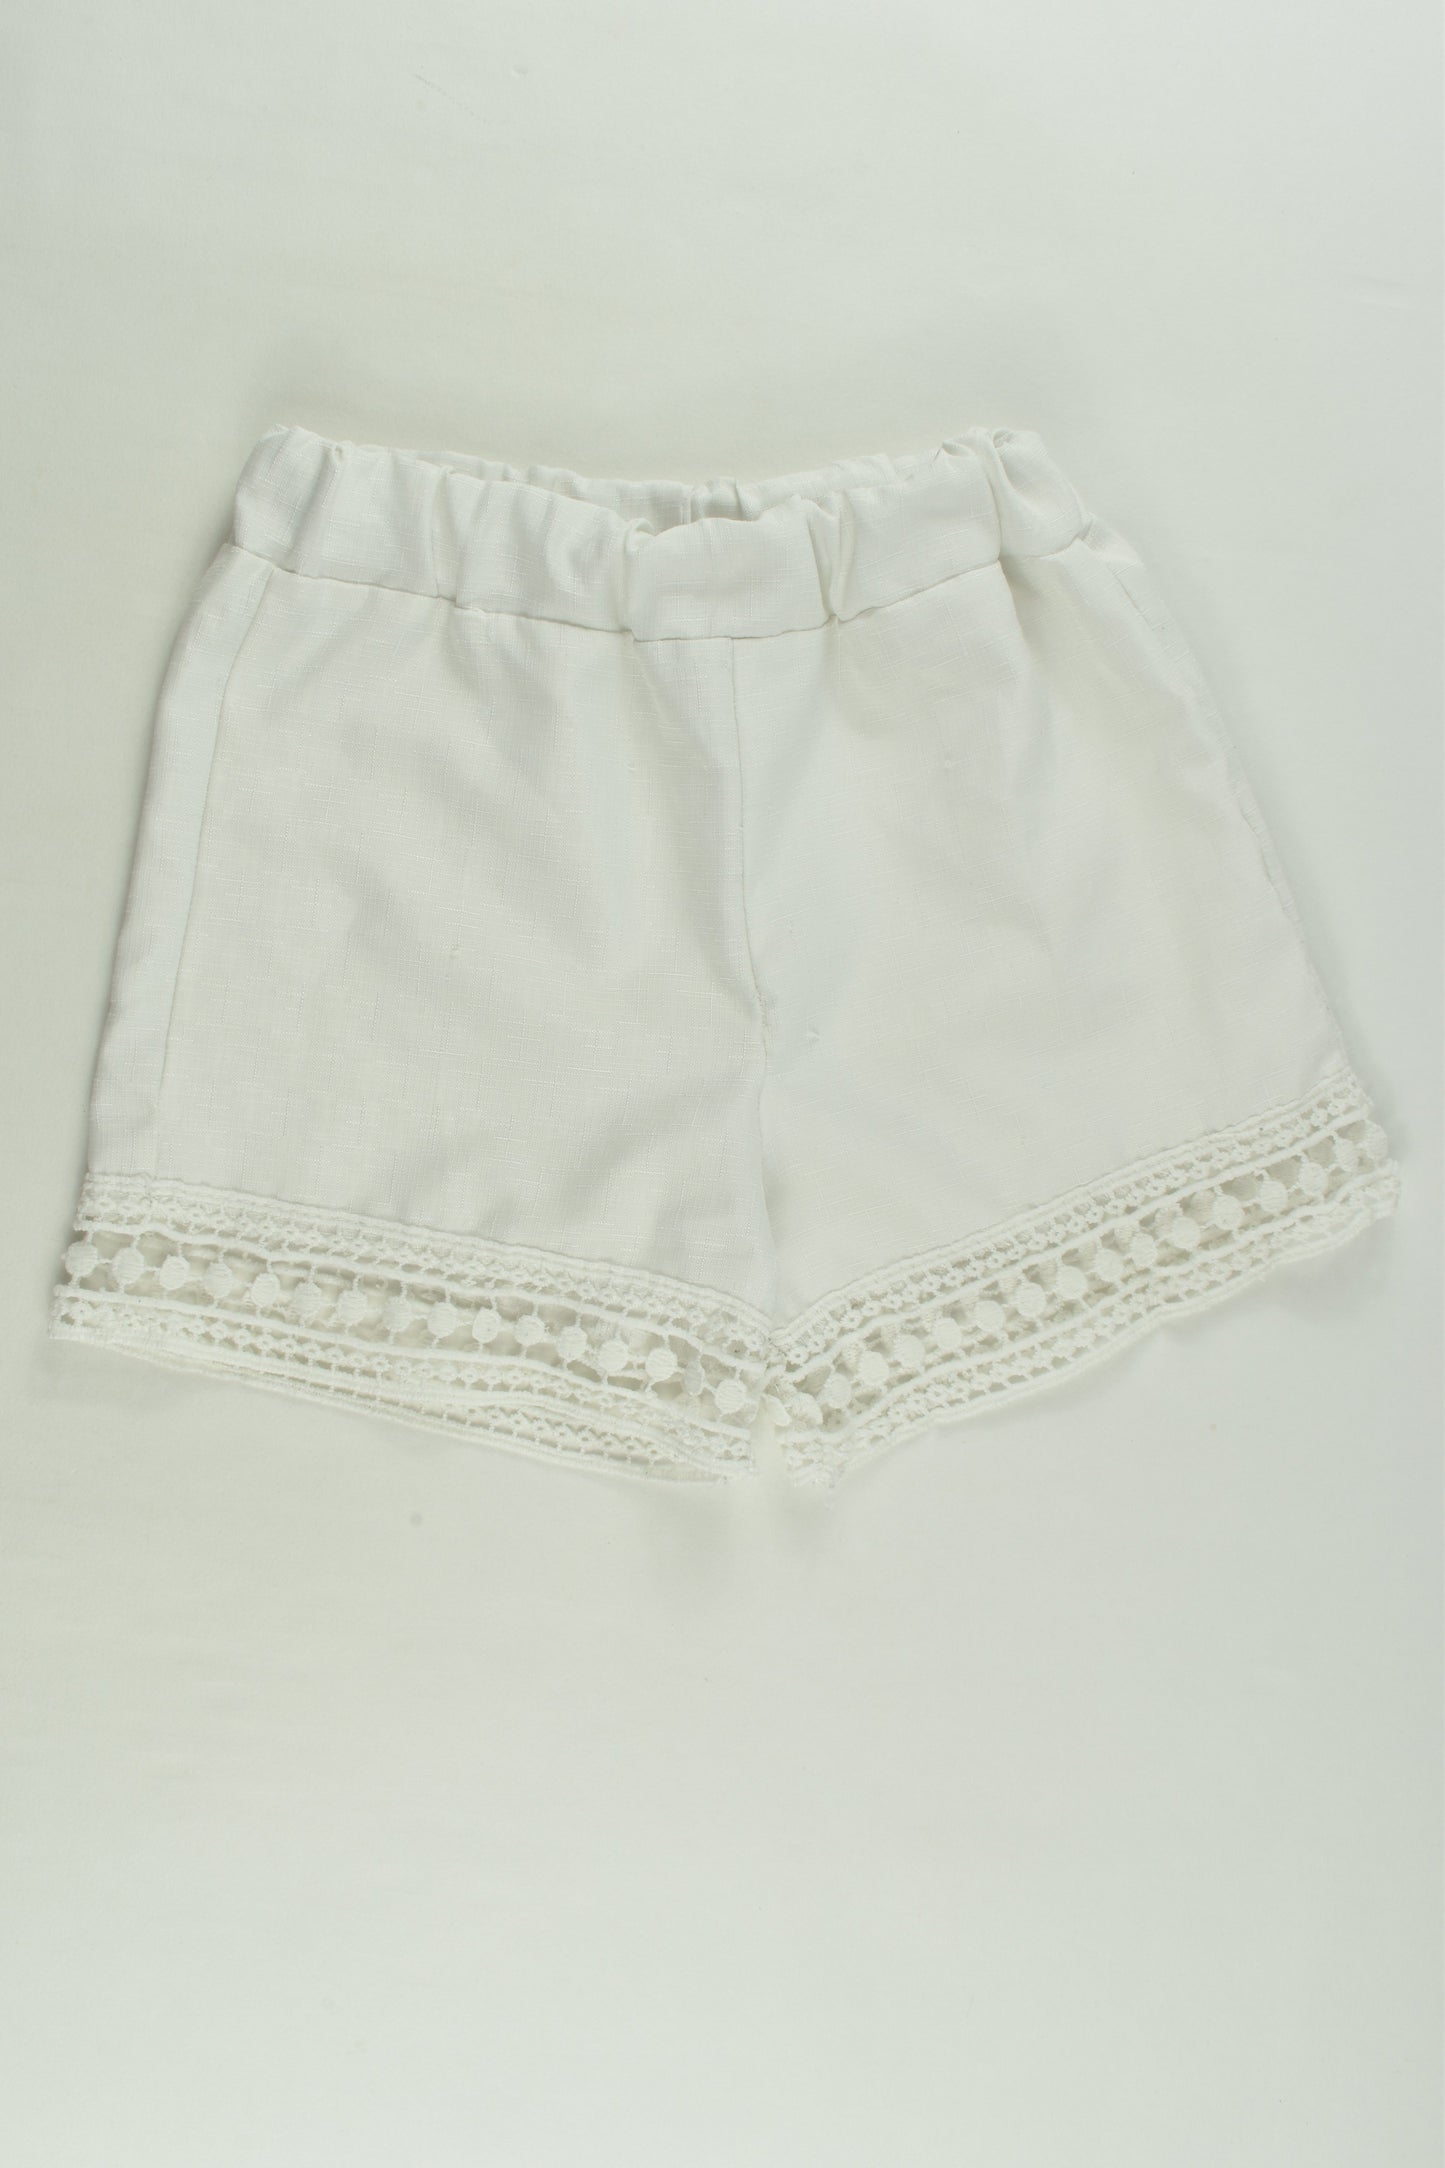 No Brand Size approx 2-3 Shorts